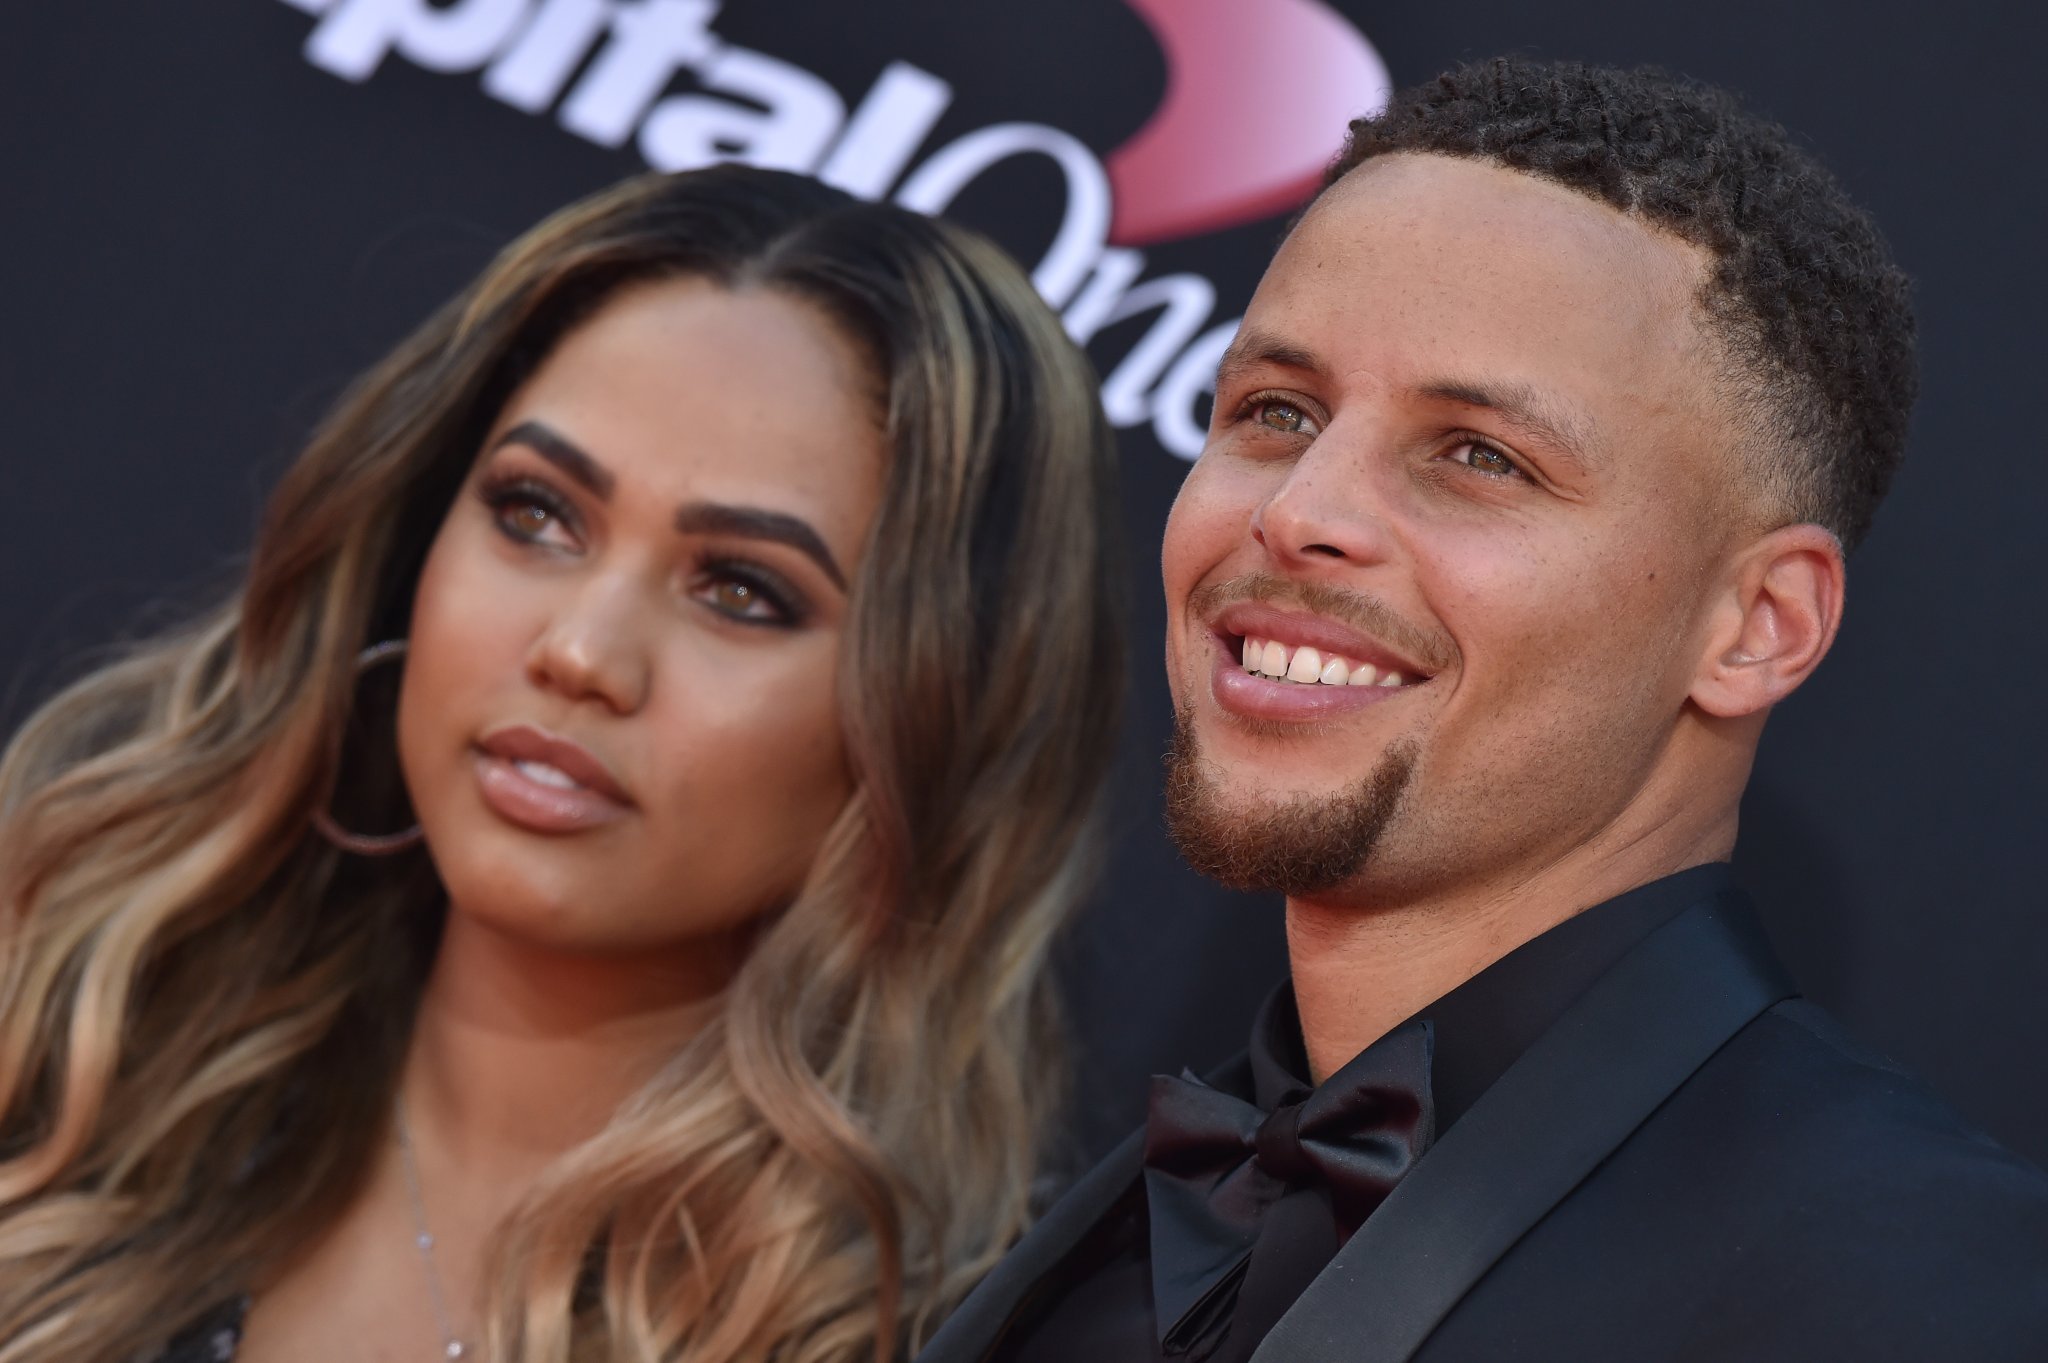 Ayesha Curry Fires Back At People Calling Her A Hypocrite For Posting Risqué Photo On Instagram